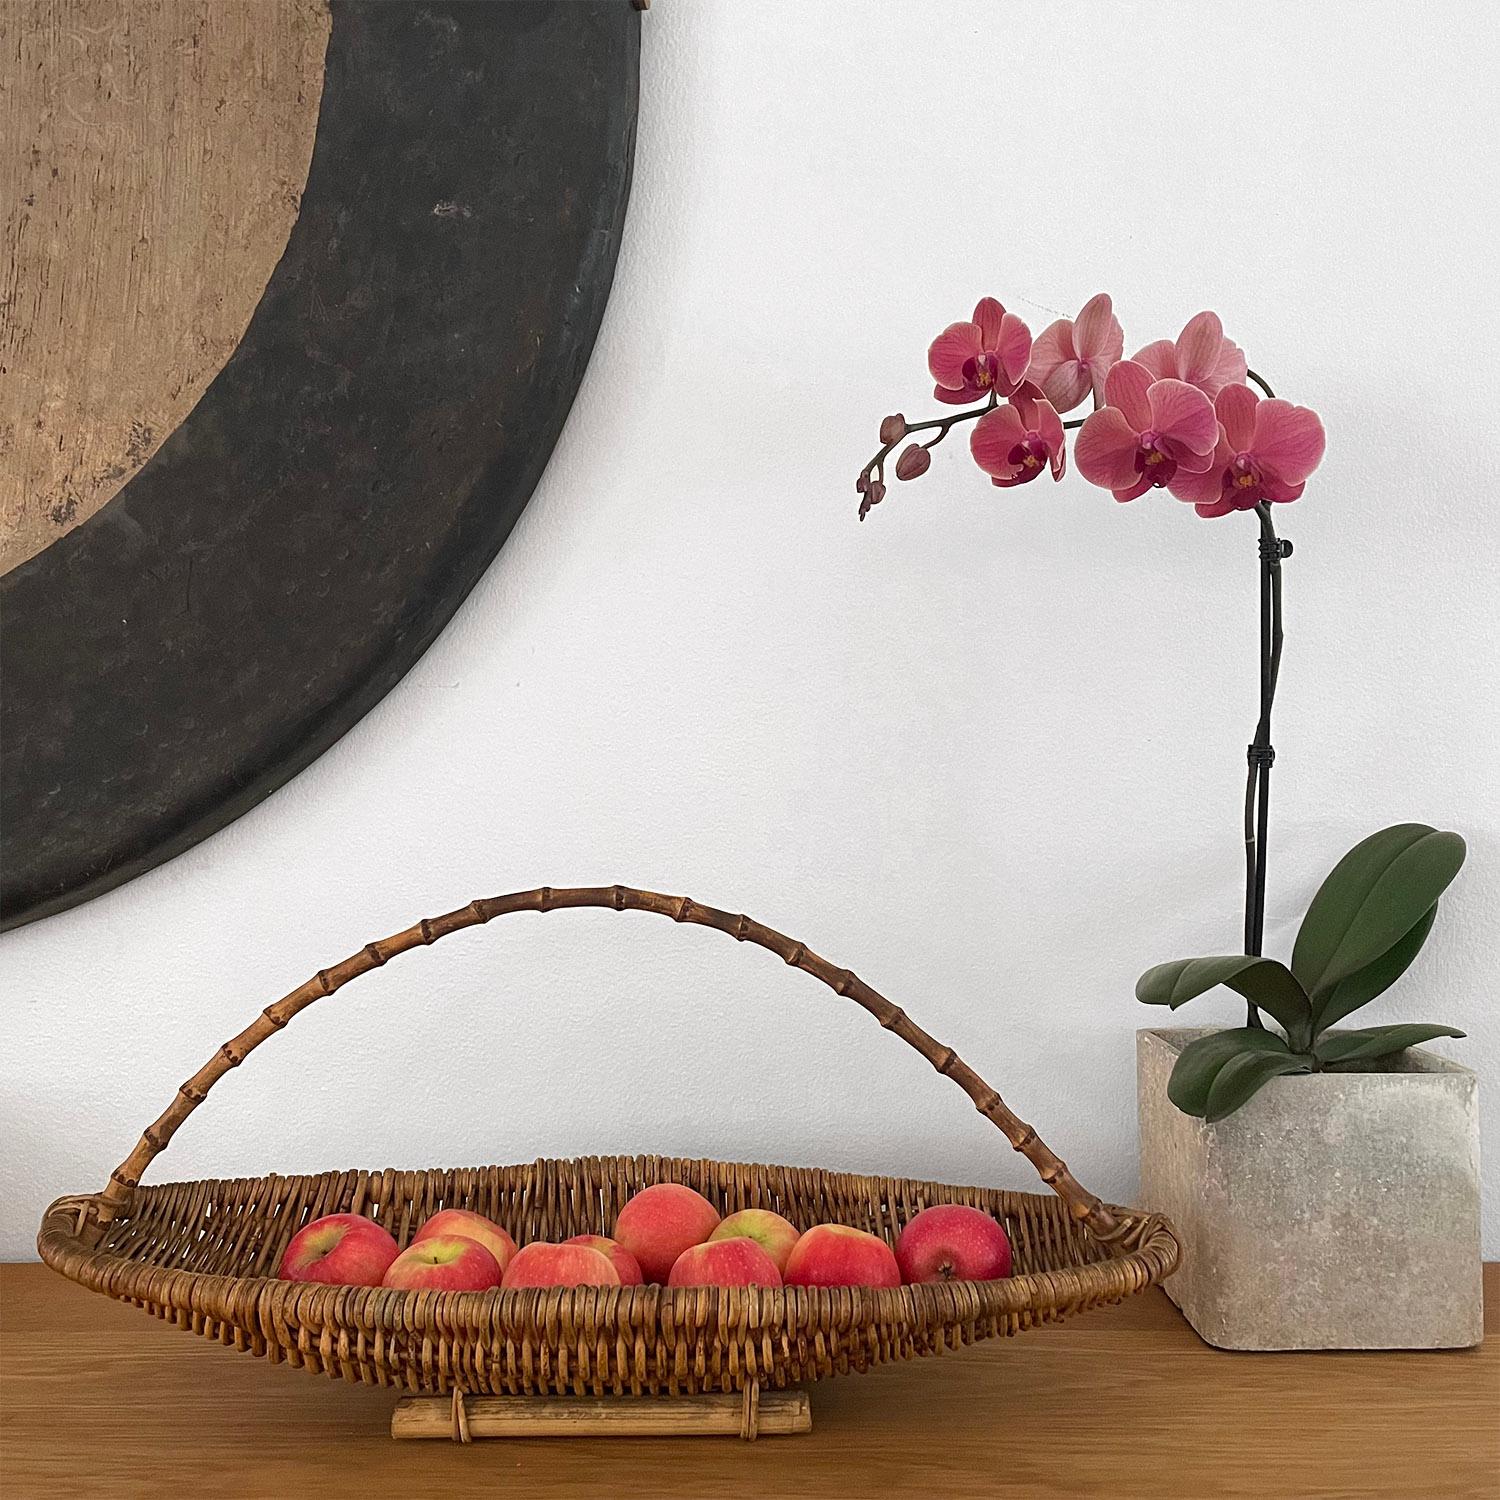 French wicker & bamboo fruit basket
Intricately woven wicker around oblong frame
Accented with arched bamboo handle
Natural color variations throughout
Patina from age and use
Beautiful addition to any surface and wonderful statement centerpiece